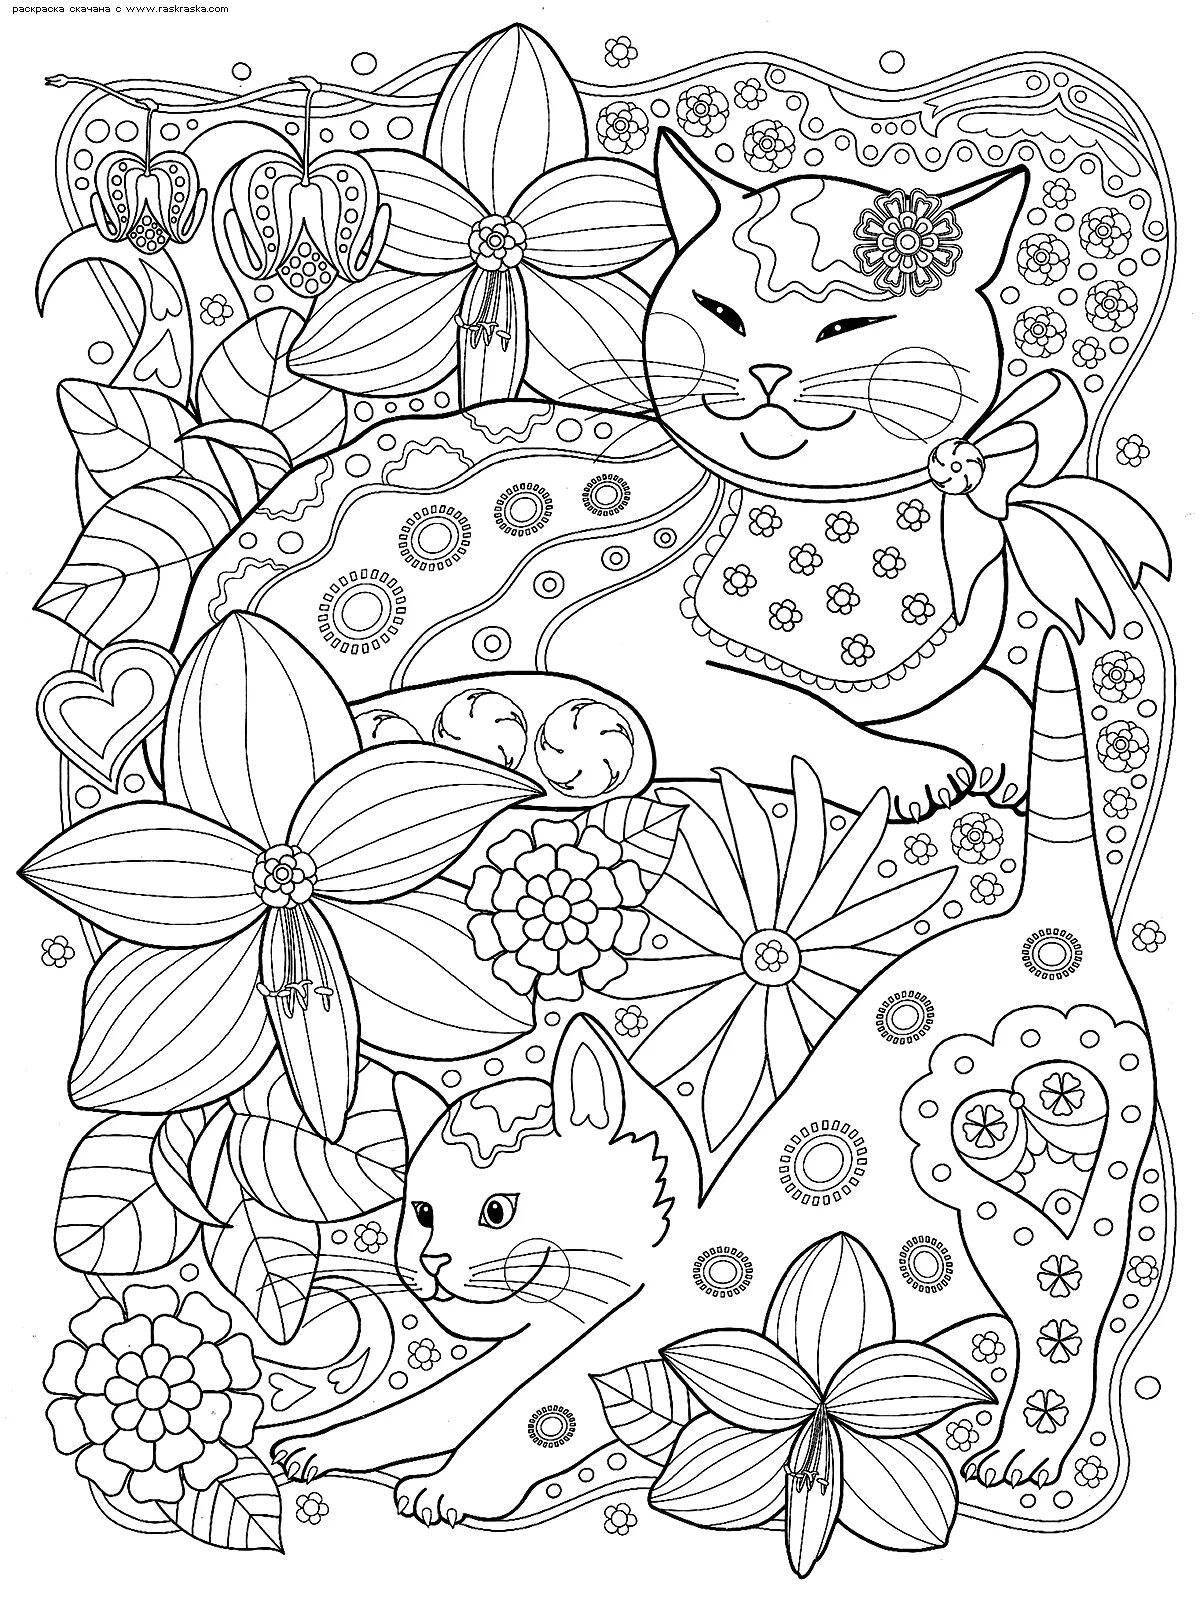 Great anti-stress cat coloring book for girls